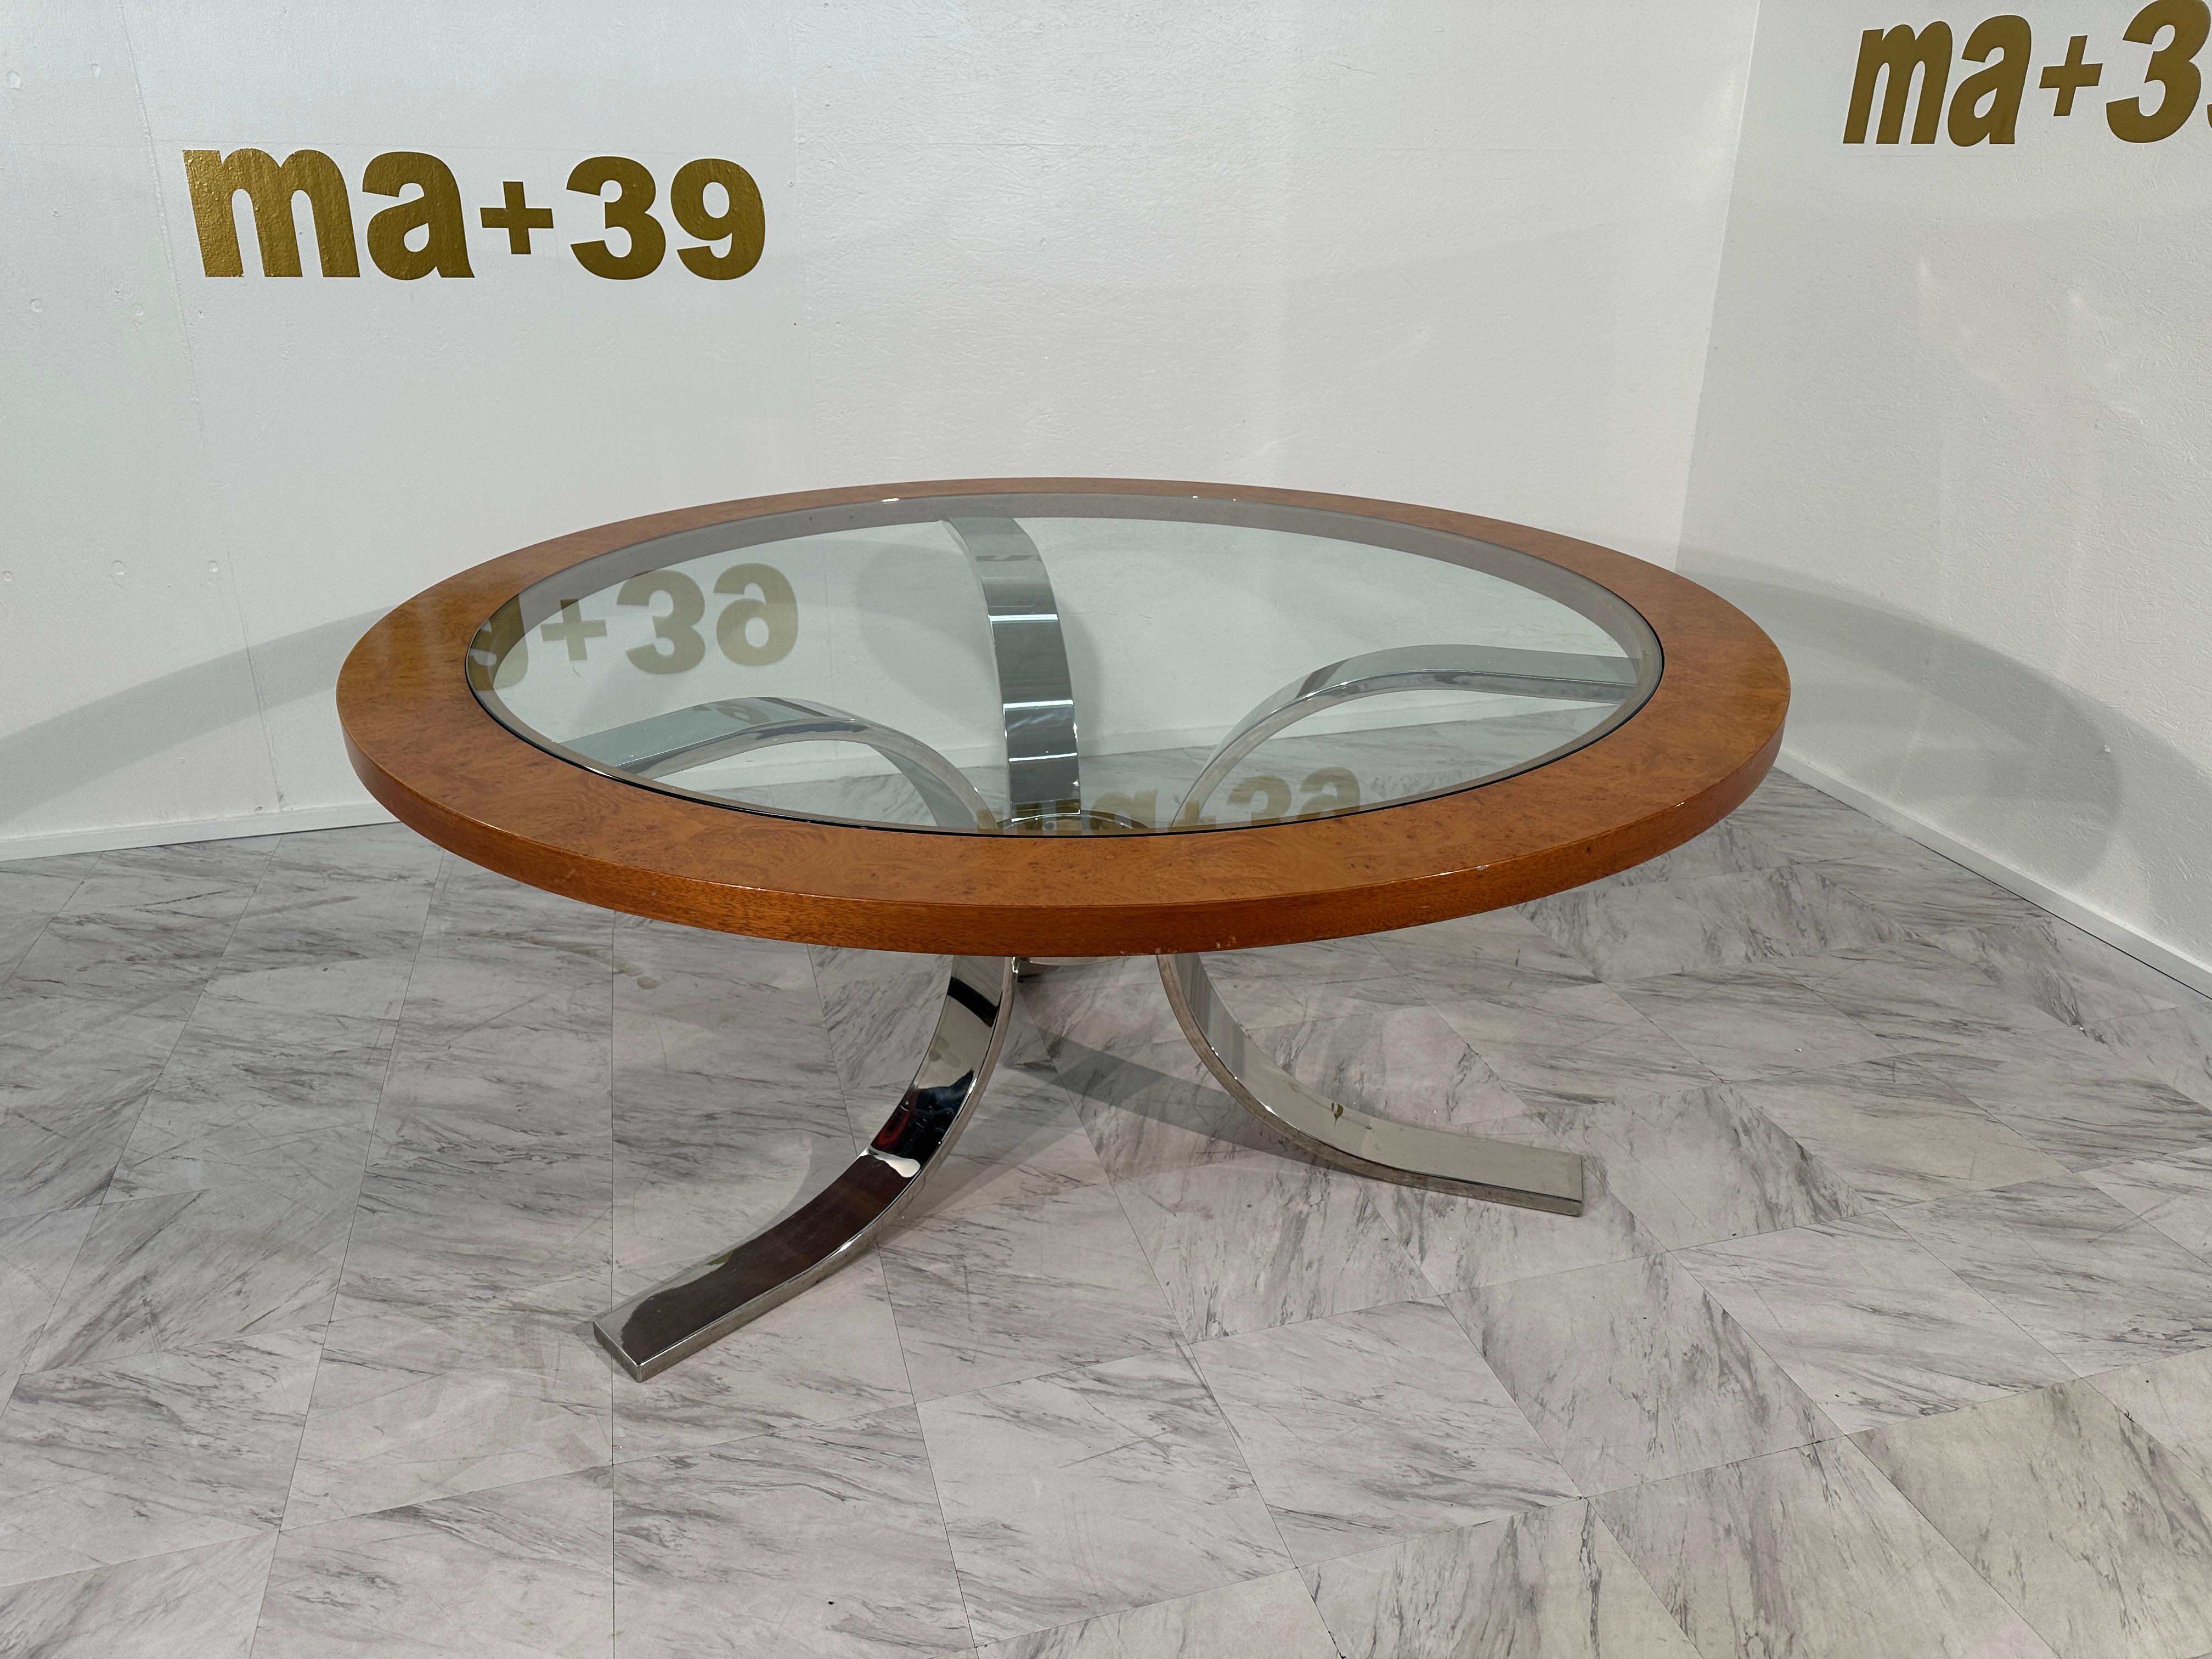 Dining table by Dada Industrial Design in nickel plated steel. 
From a famous appartment in Nice, decoreded 1973 by Gilbert Lamaletti .
70s table Dada international chromed legs and circular table with transparent glass and wooden edging which makes